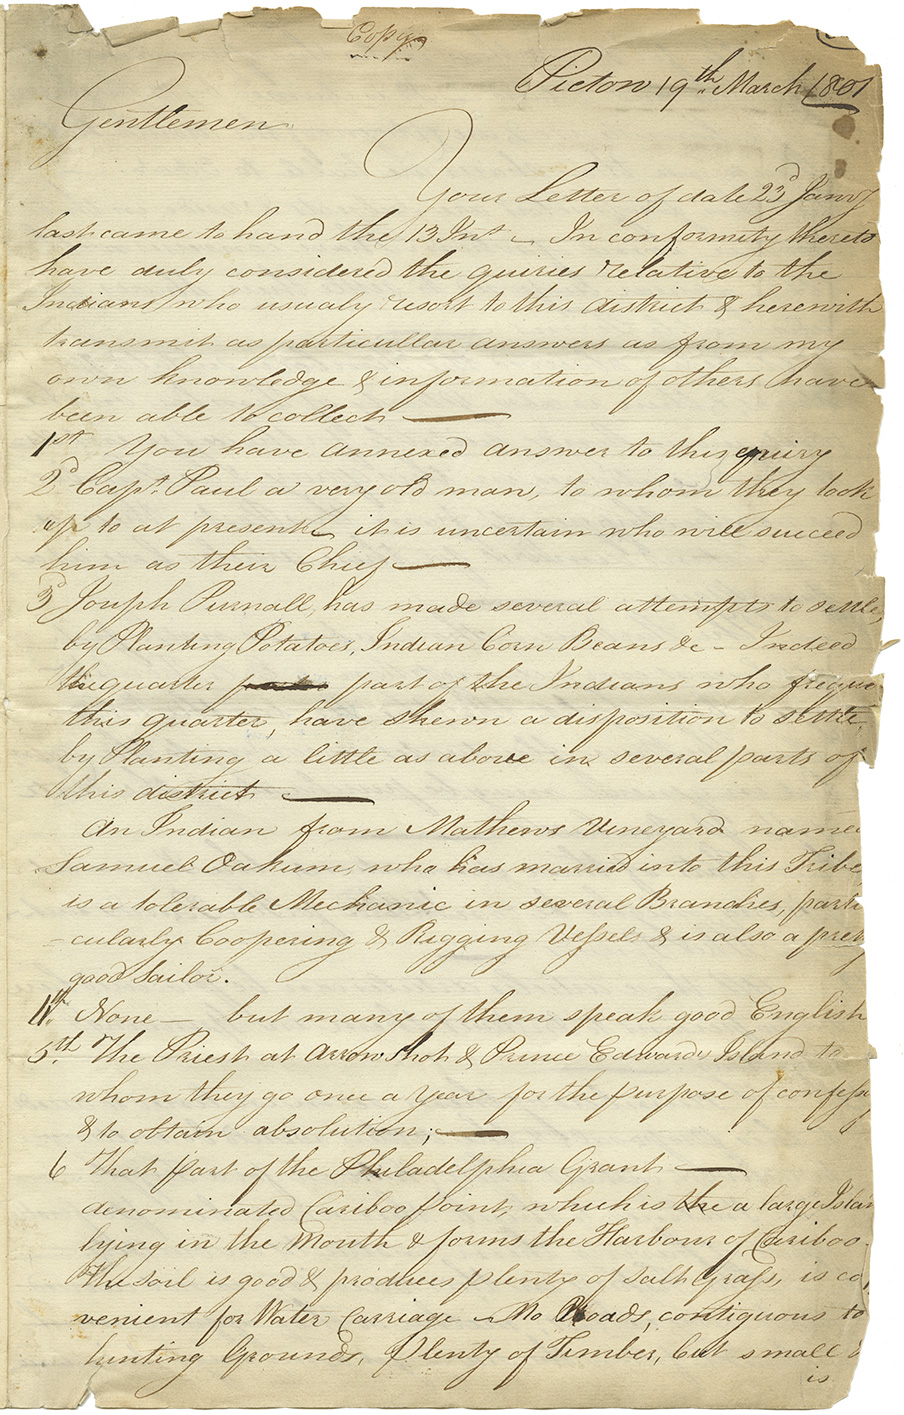 Letter from Edward Mortimer to Brenton, Morris, Wallace and Tonge that answers questions asked in a circular letter regarding Mi'kmaq.